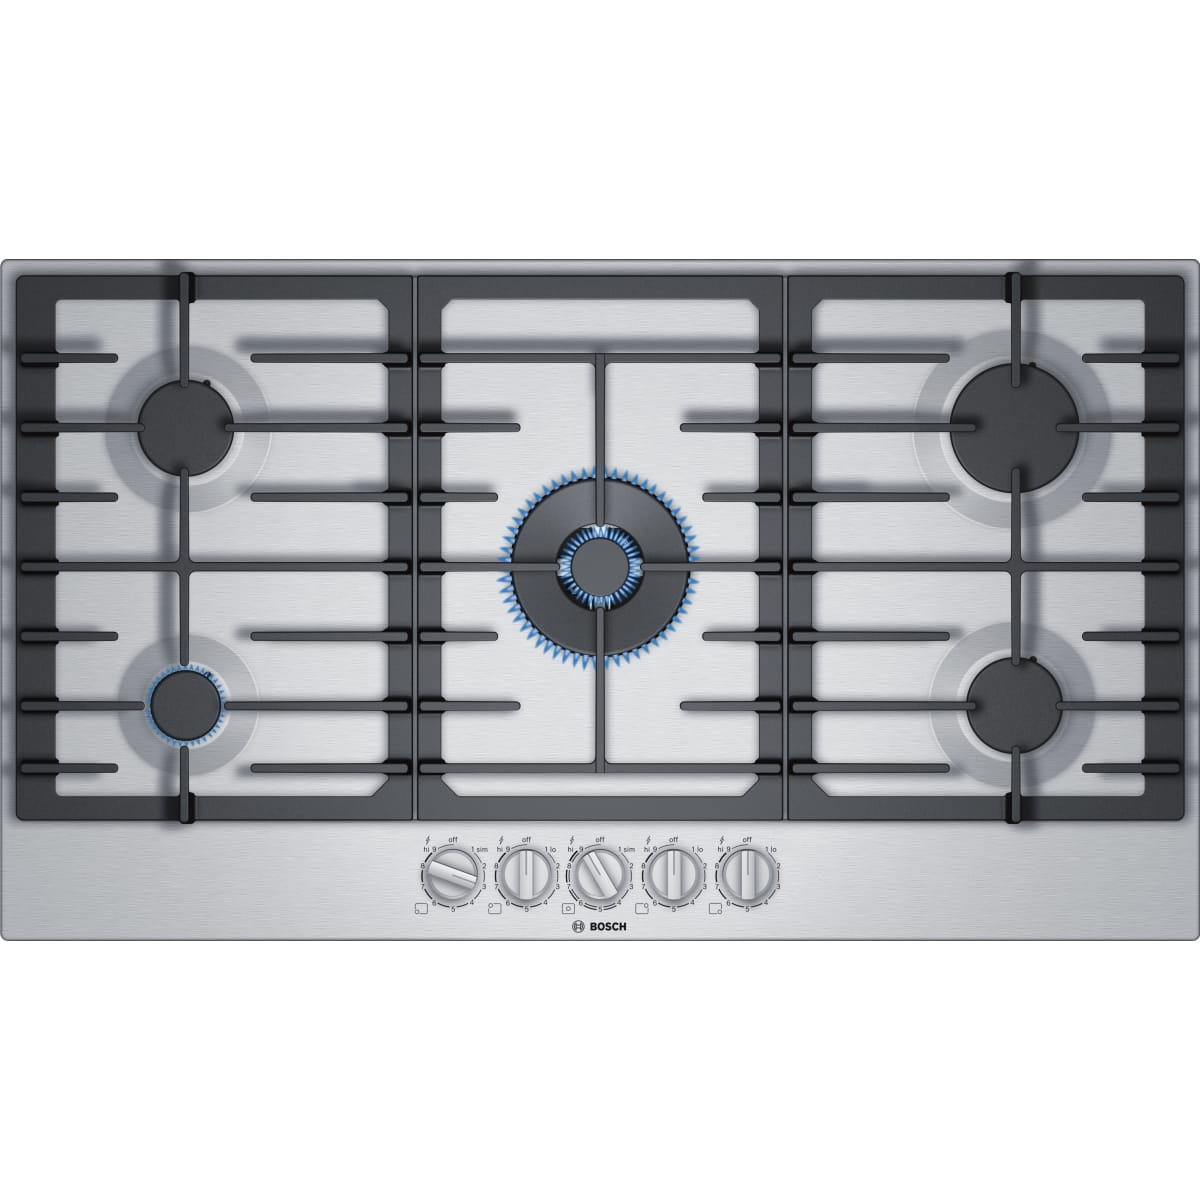 BOSCH NGM8657UC 800 Series Natural Gas Cooktop 36 Inch Stainless steel.